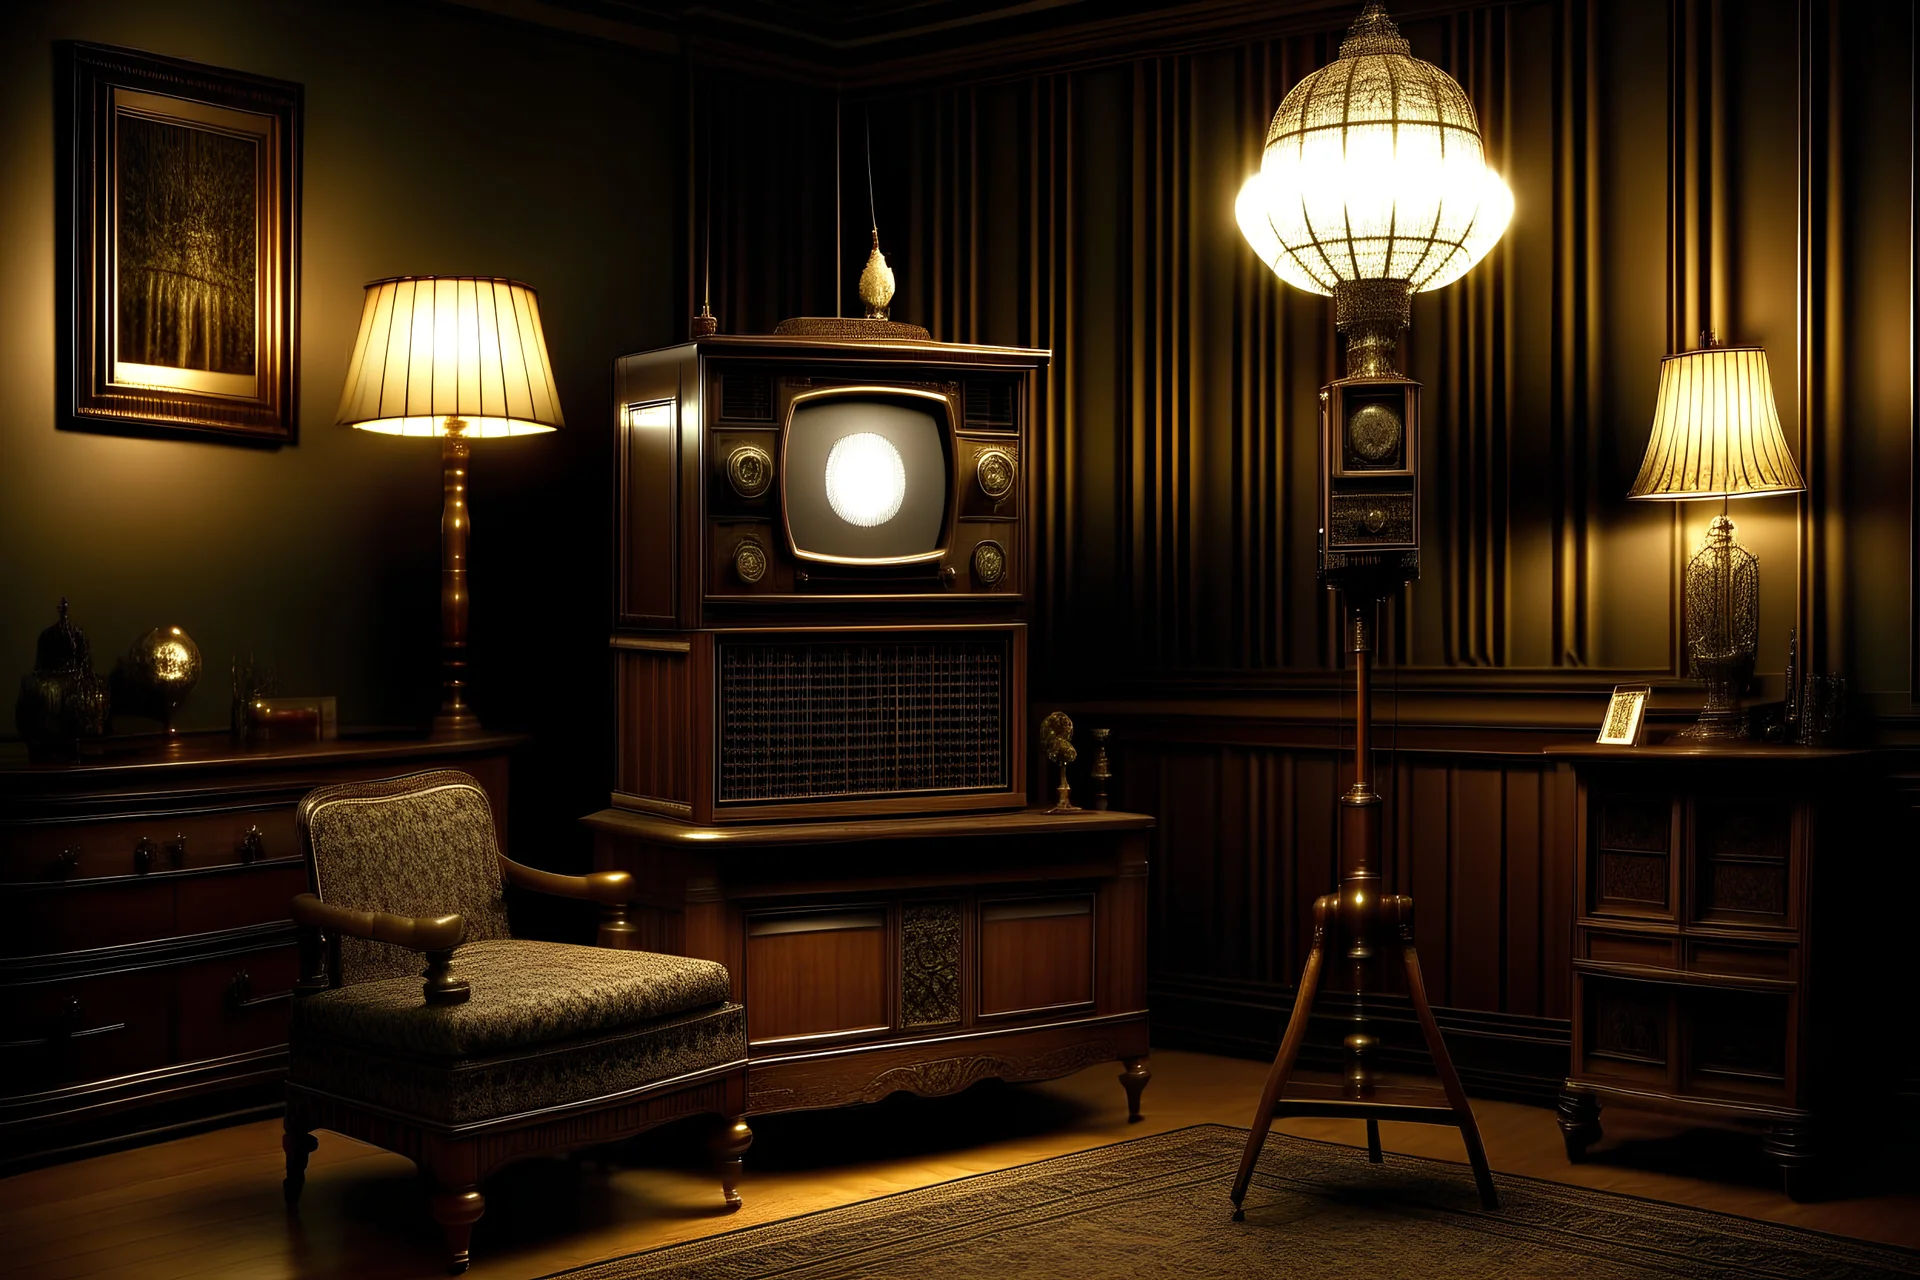 flickering 6'x8' vintage television set in ornate wooden cabinet. gleaming 4 foot tall Edison light bulb with tripod. vintage old fashioned two piece telephone circa 1880 8 feet tall. average midcentury American living room depicted as architectural scale model